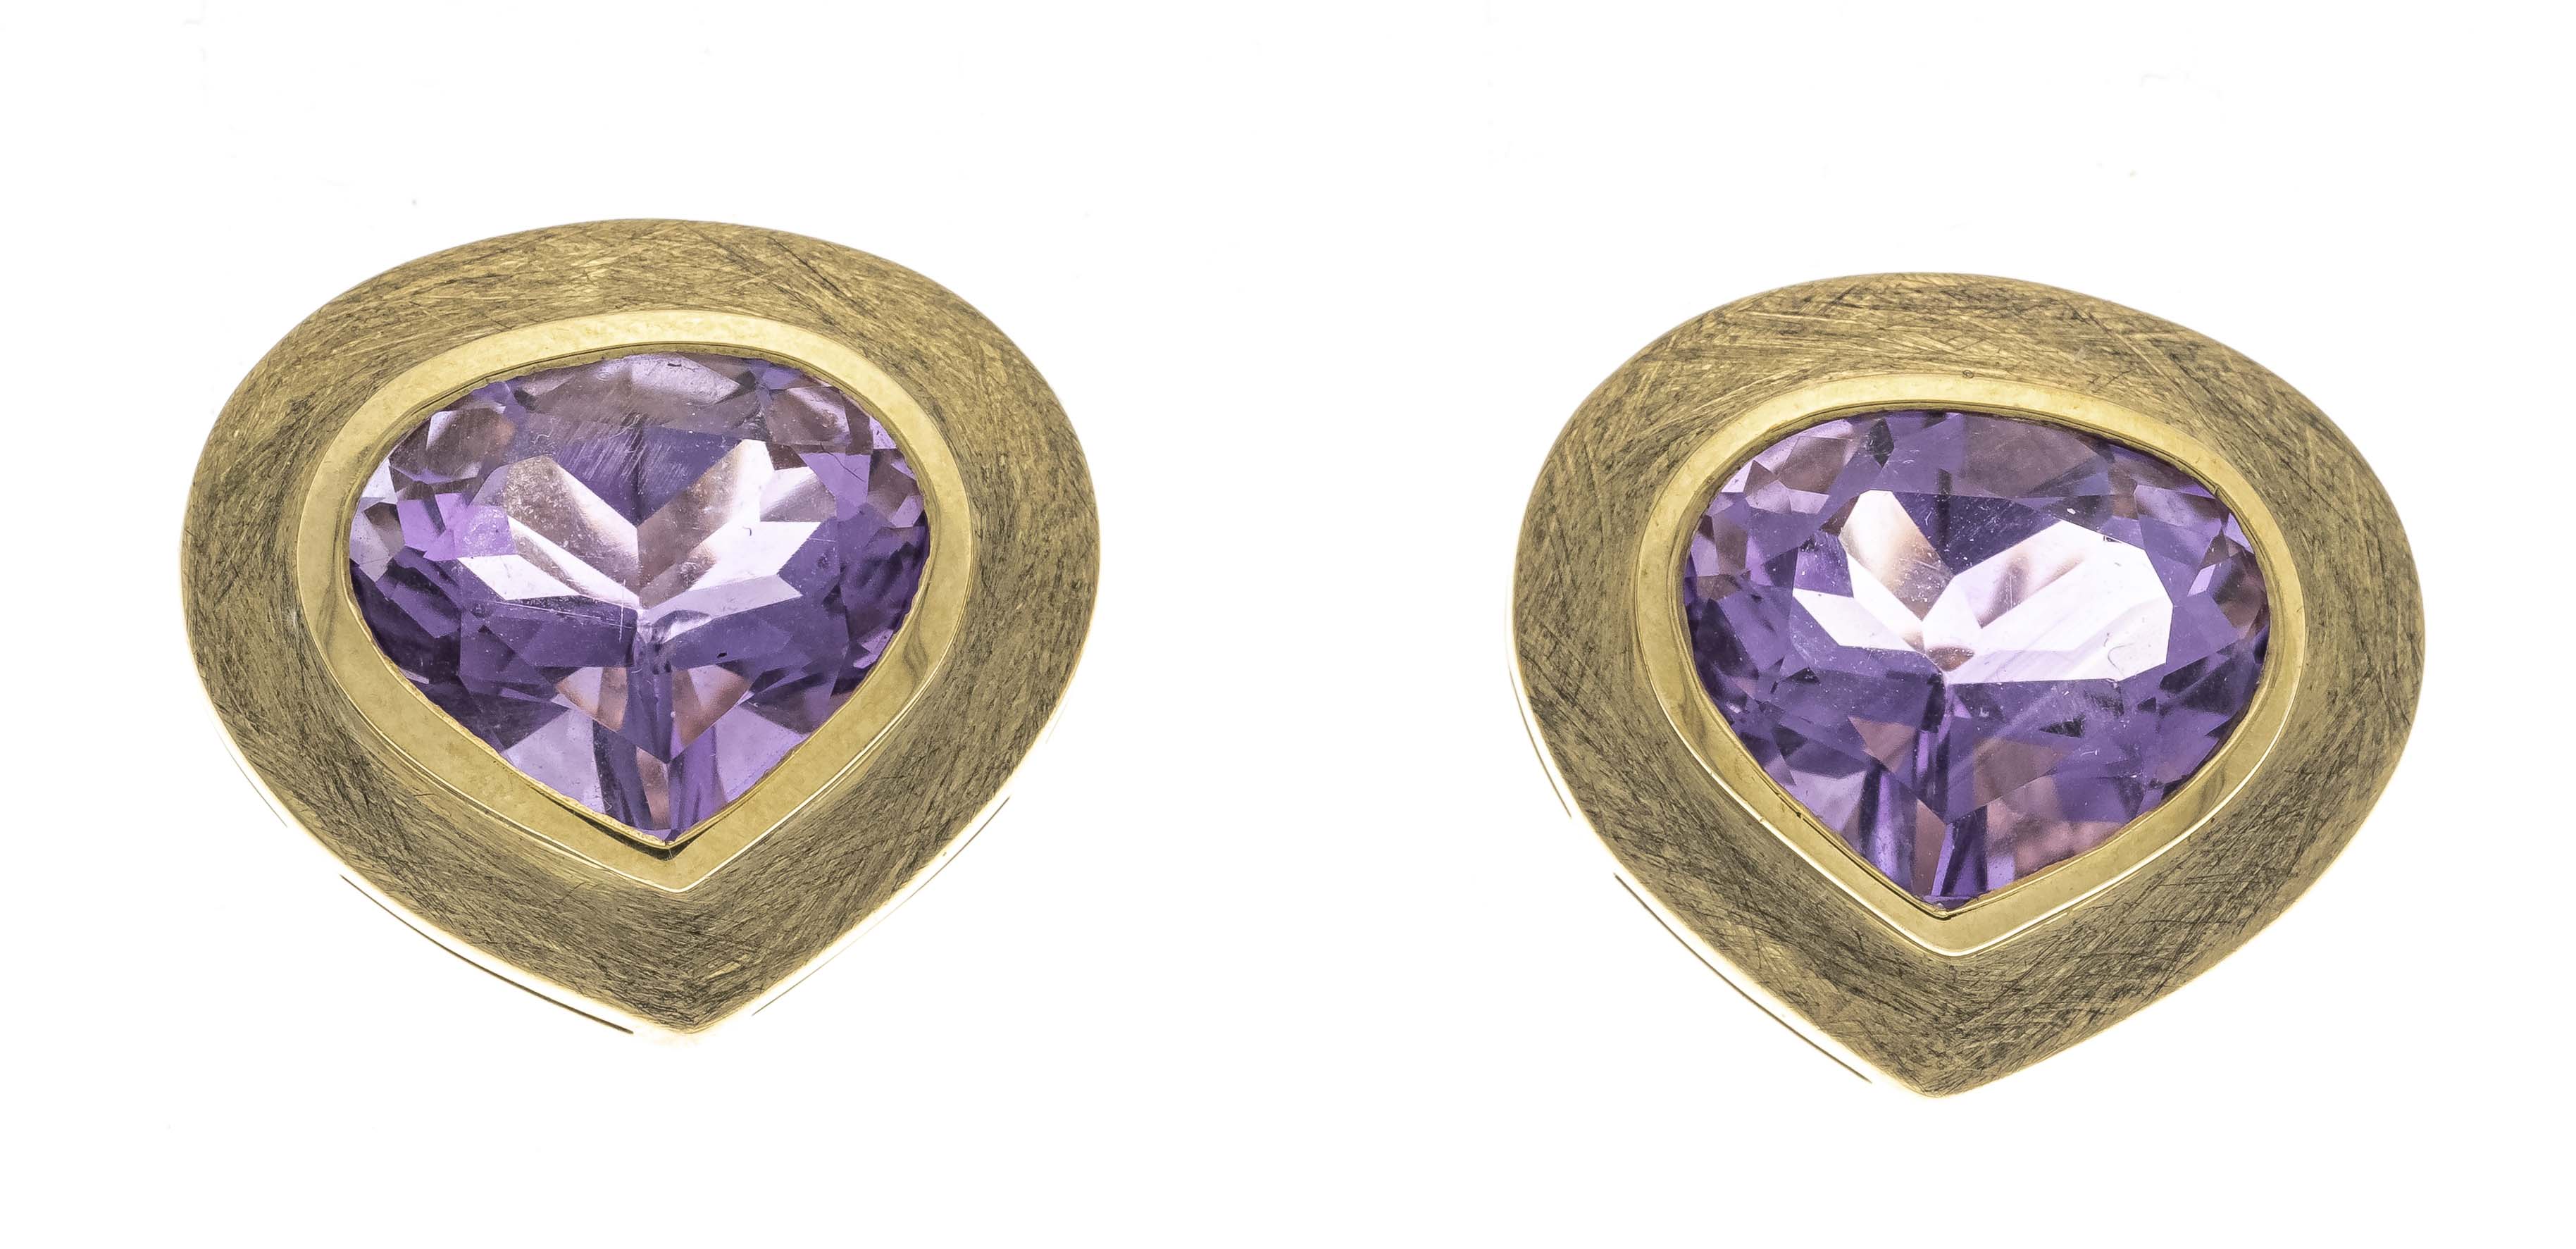 Amethyst ear studs GG 375/000 partially matted, with 2 faceted amethyst drops 11.2 x 13.1 mm, l.